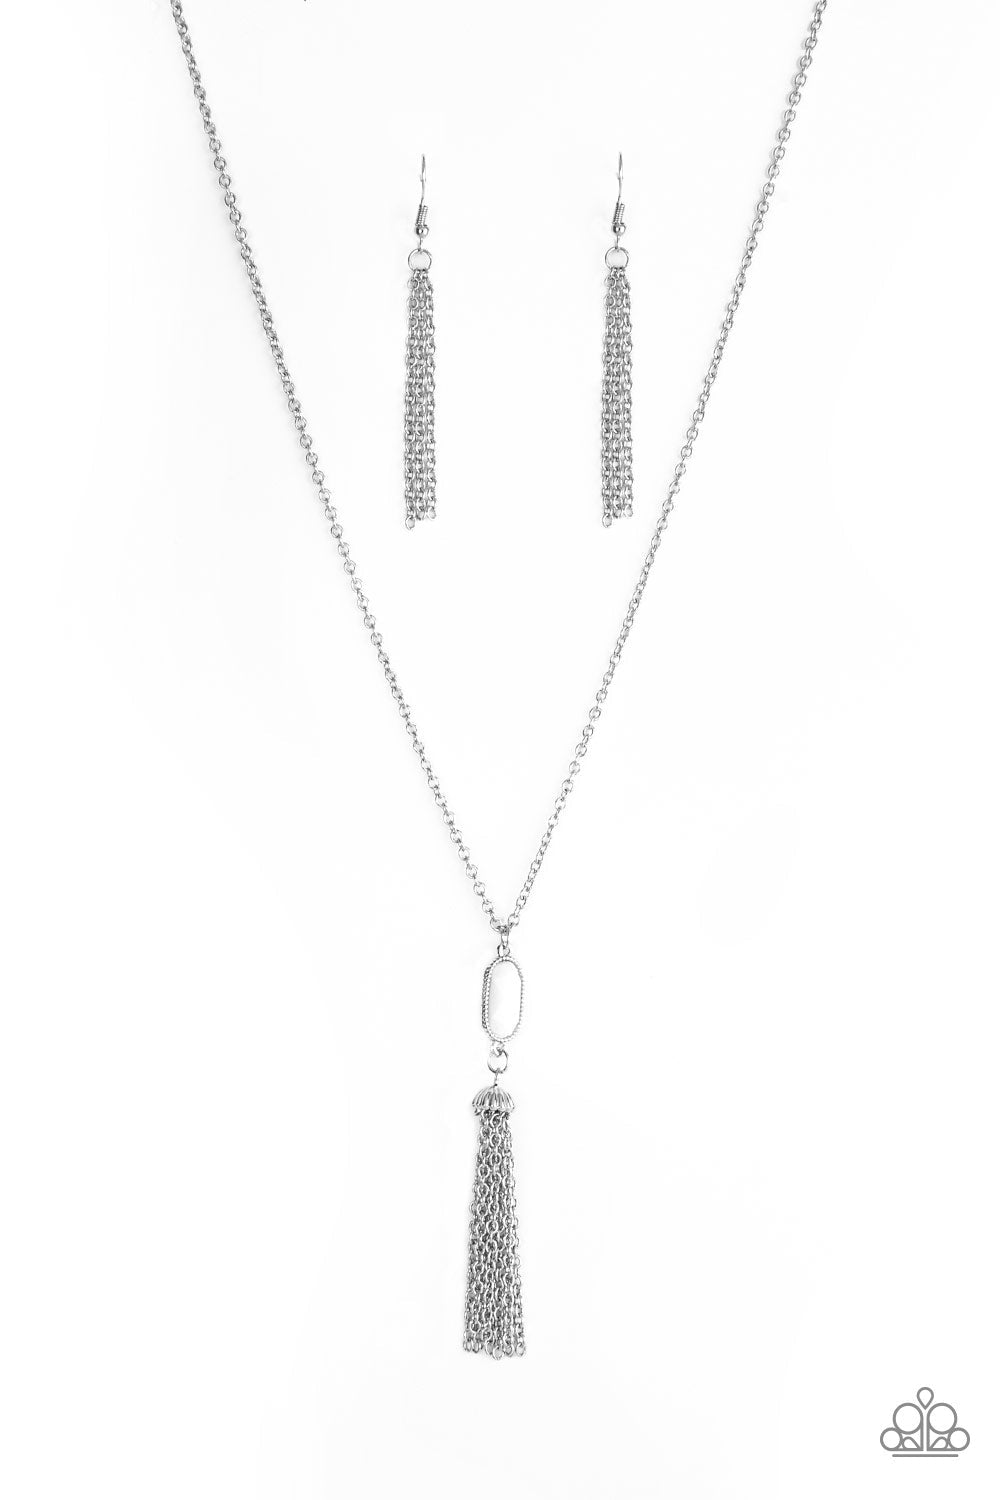 Tassel Tease - White and Silver Necklace - Paparazzi Accessories - Swinging from a lengthened silver chain, a faceted white bead gives way to a shimmery silver tassel for a whimsical look. Features an adjustable clasp closure. Sold as one individual necklace.